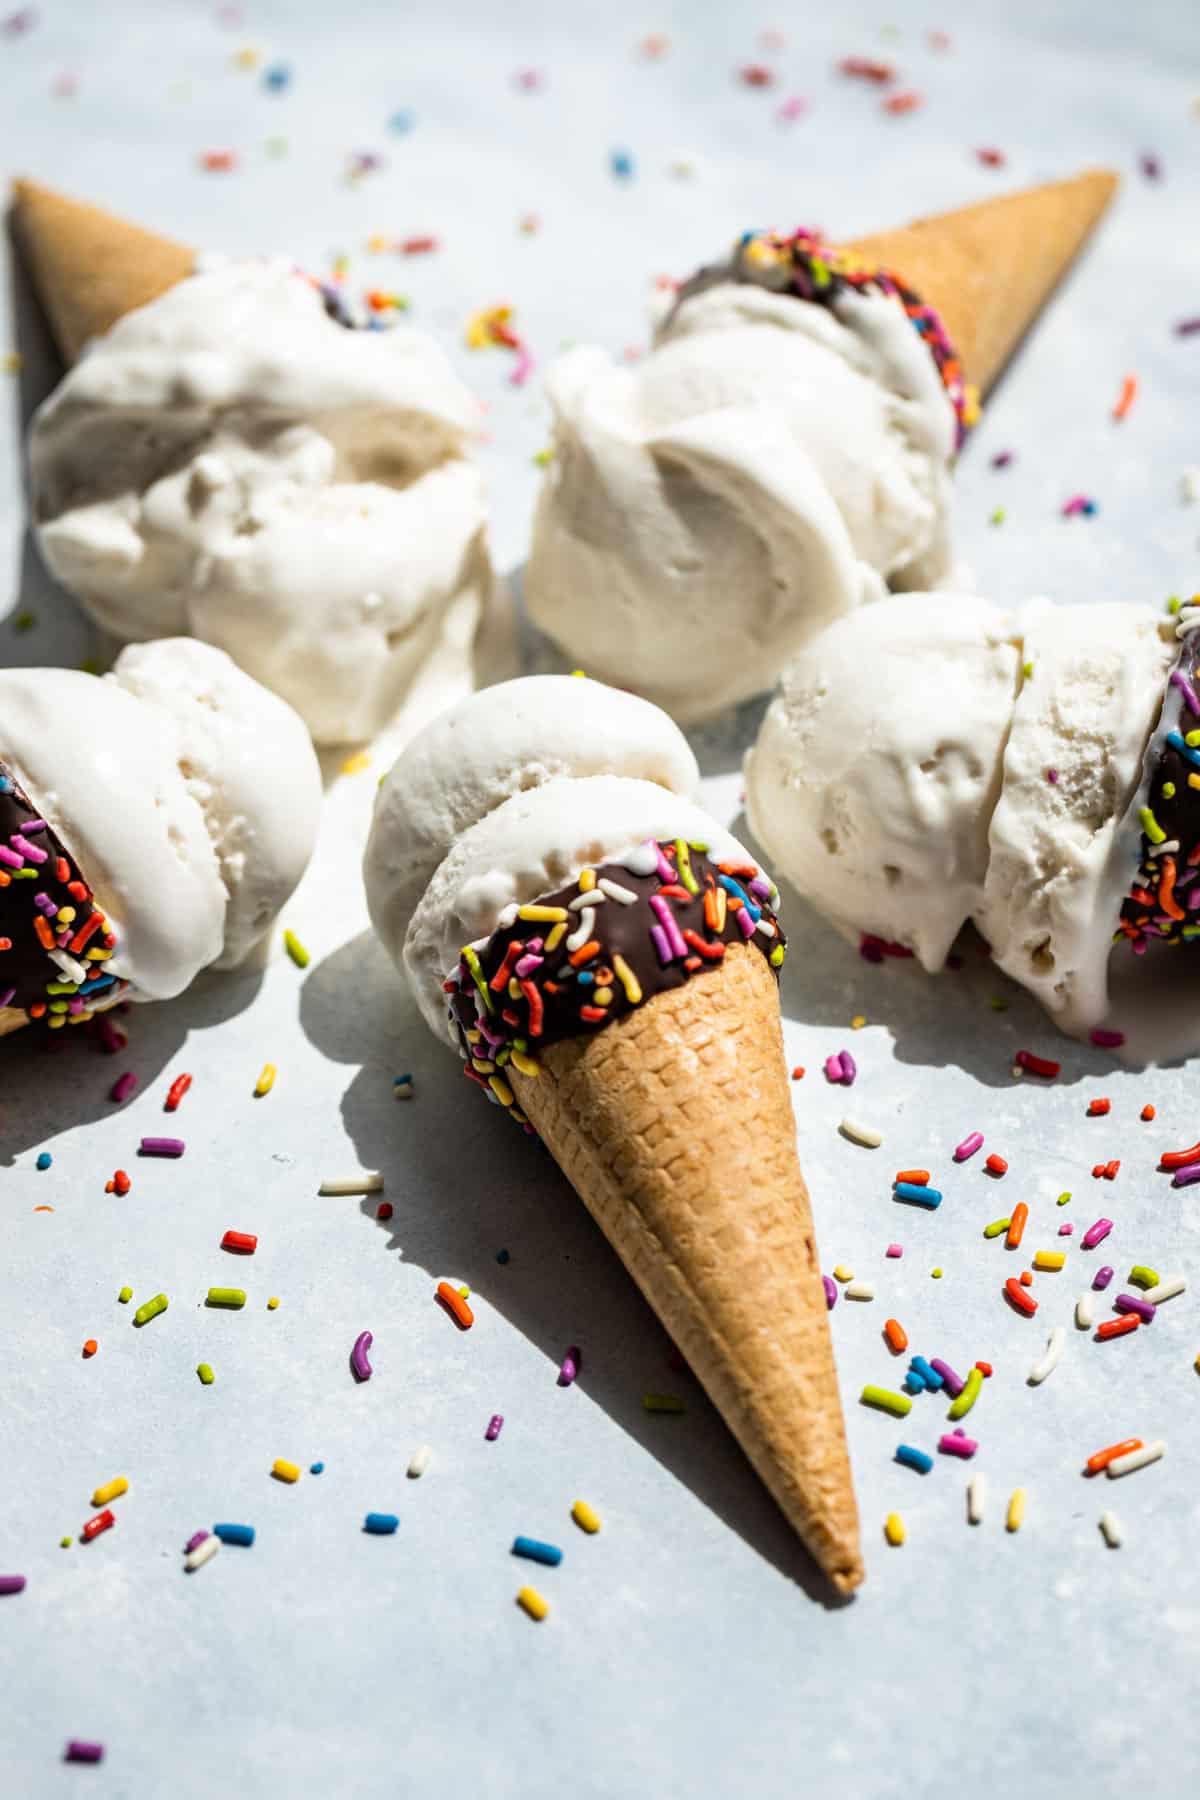 Five chocolate dipped ice cream cones filled with Coconut Ice Cream with sprinkles around them.